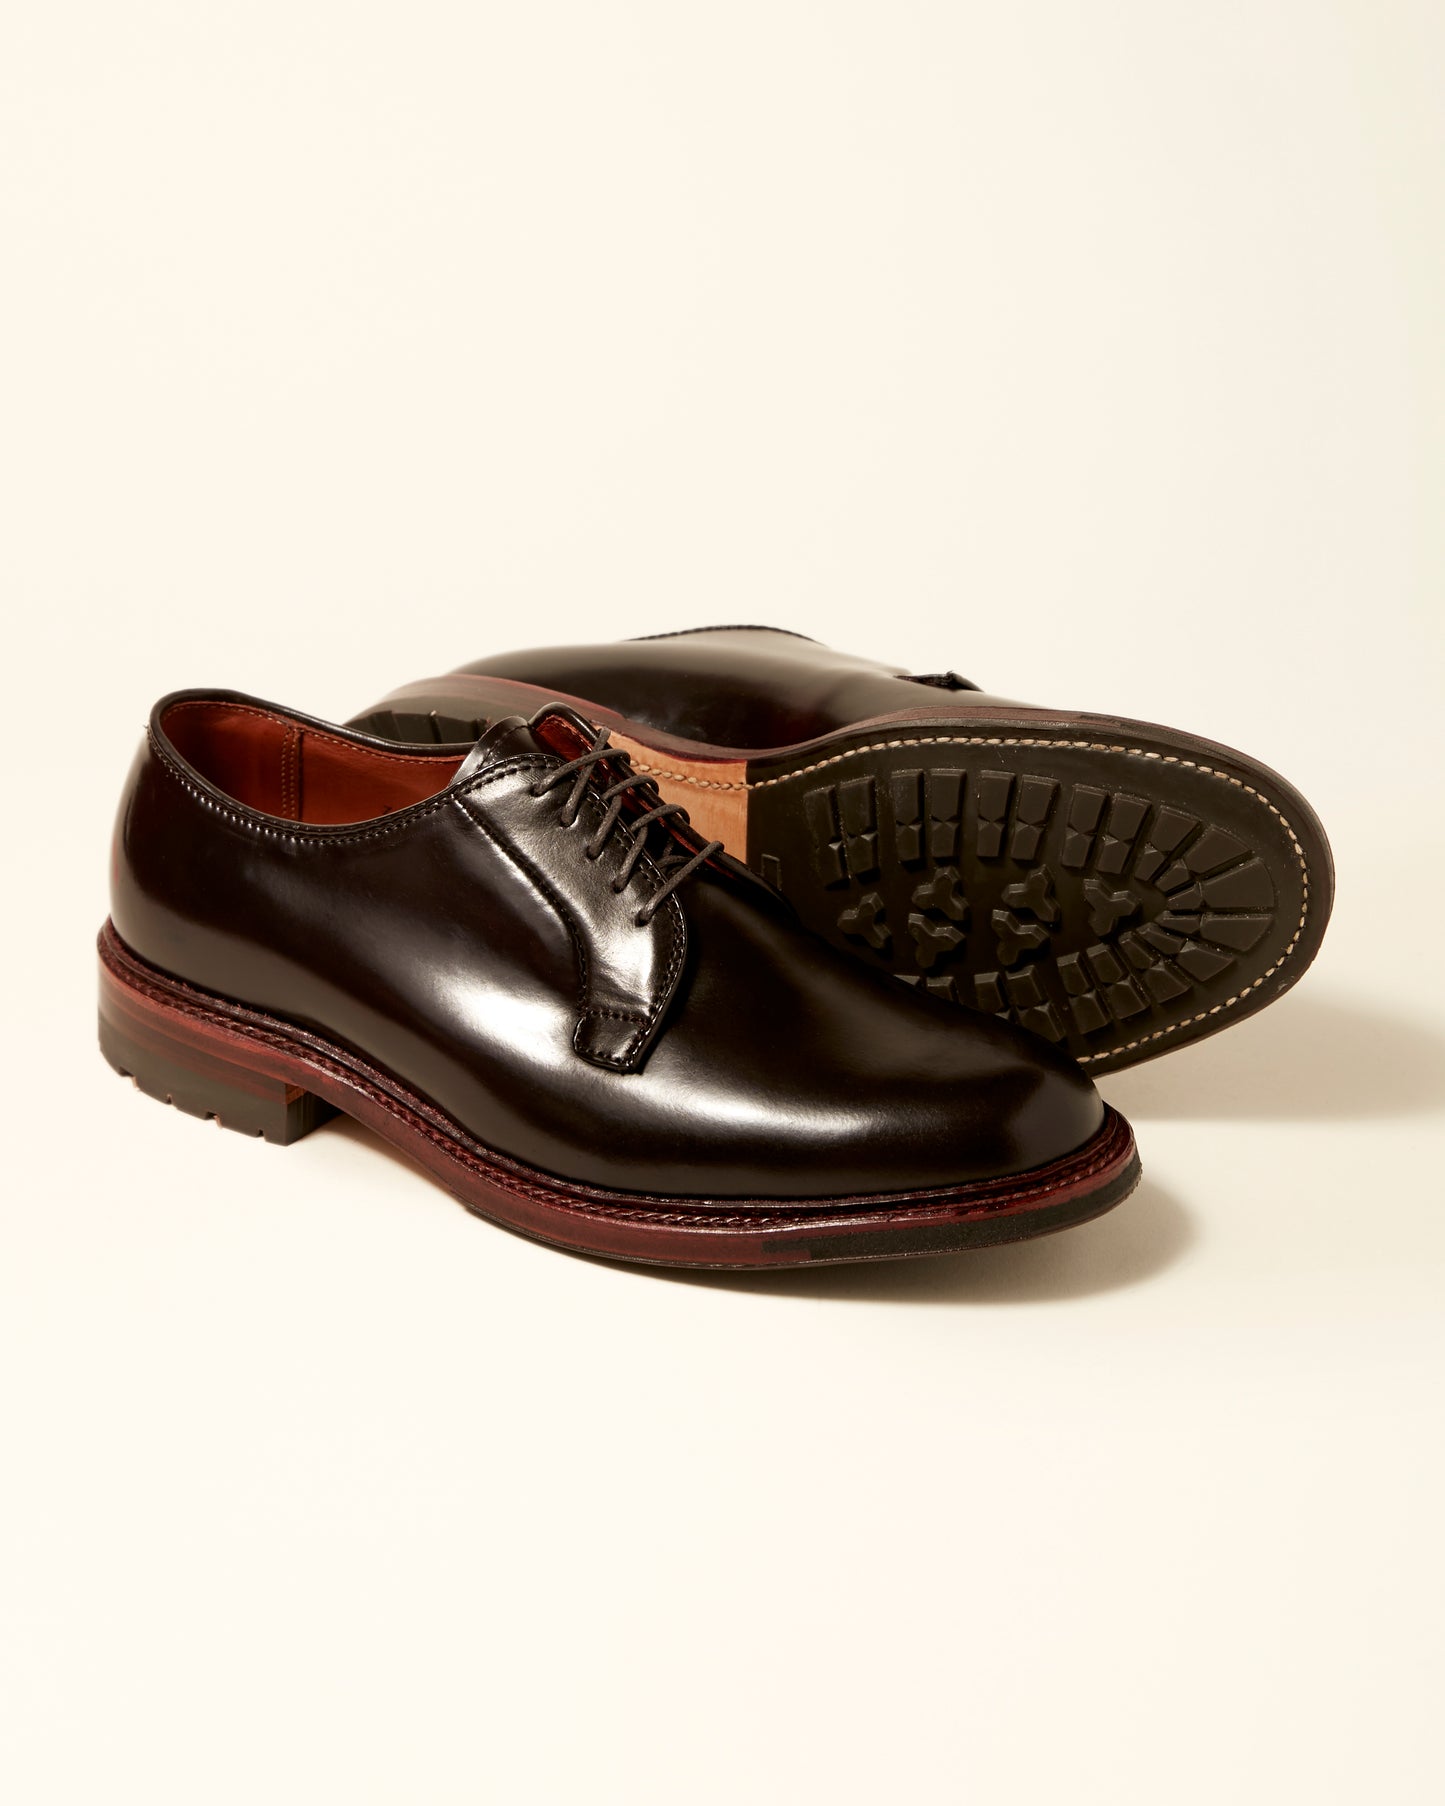 990AC Plain Toe Blucher in Color 8 Shell Cordovan, Barrie Last